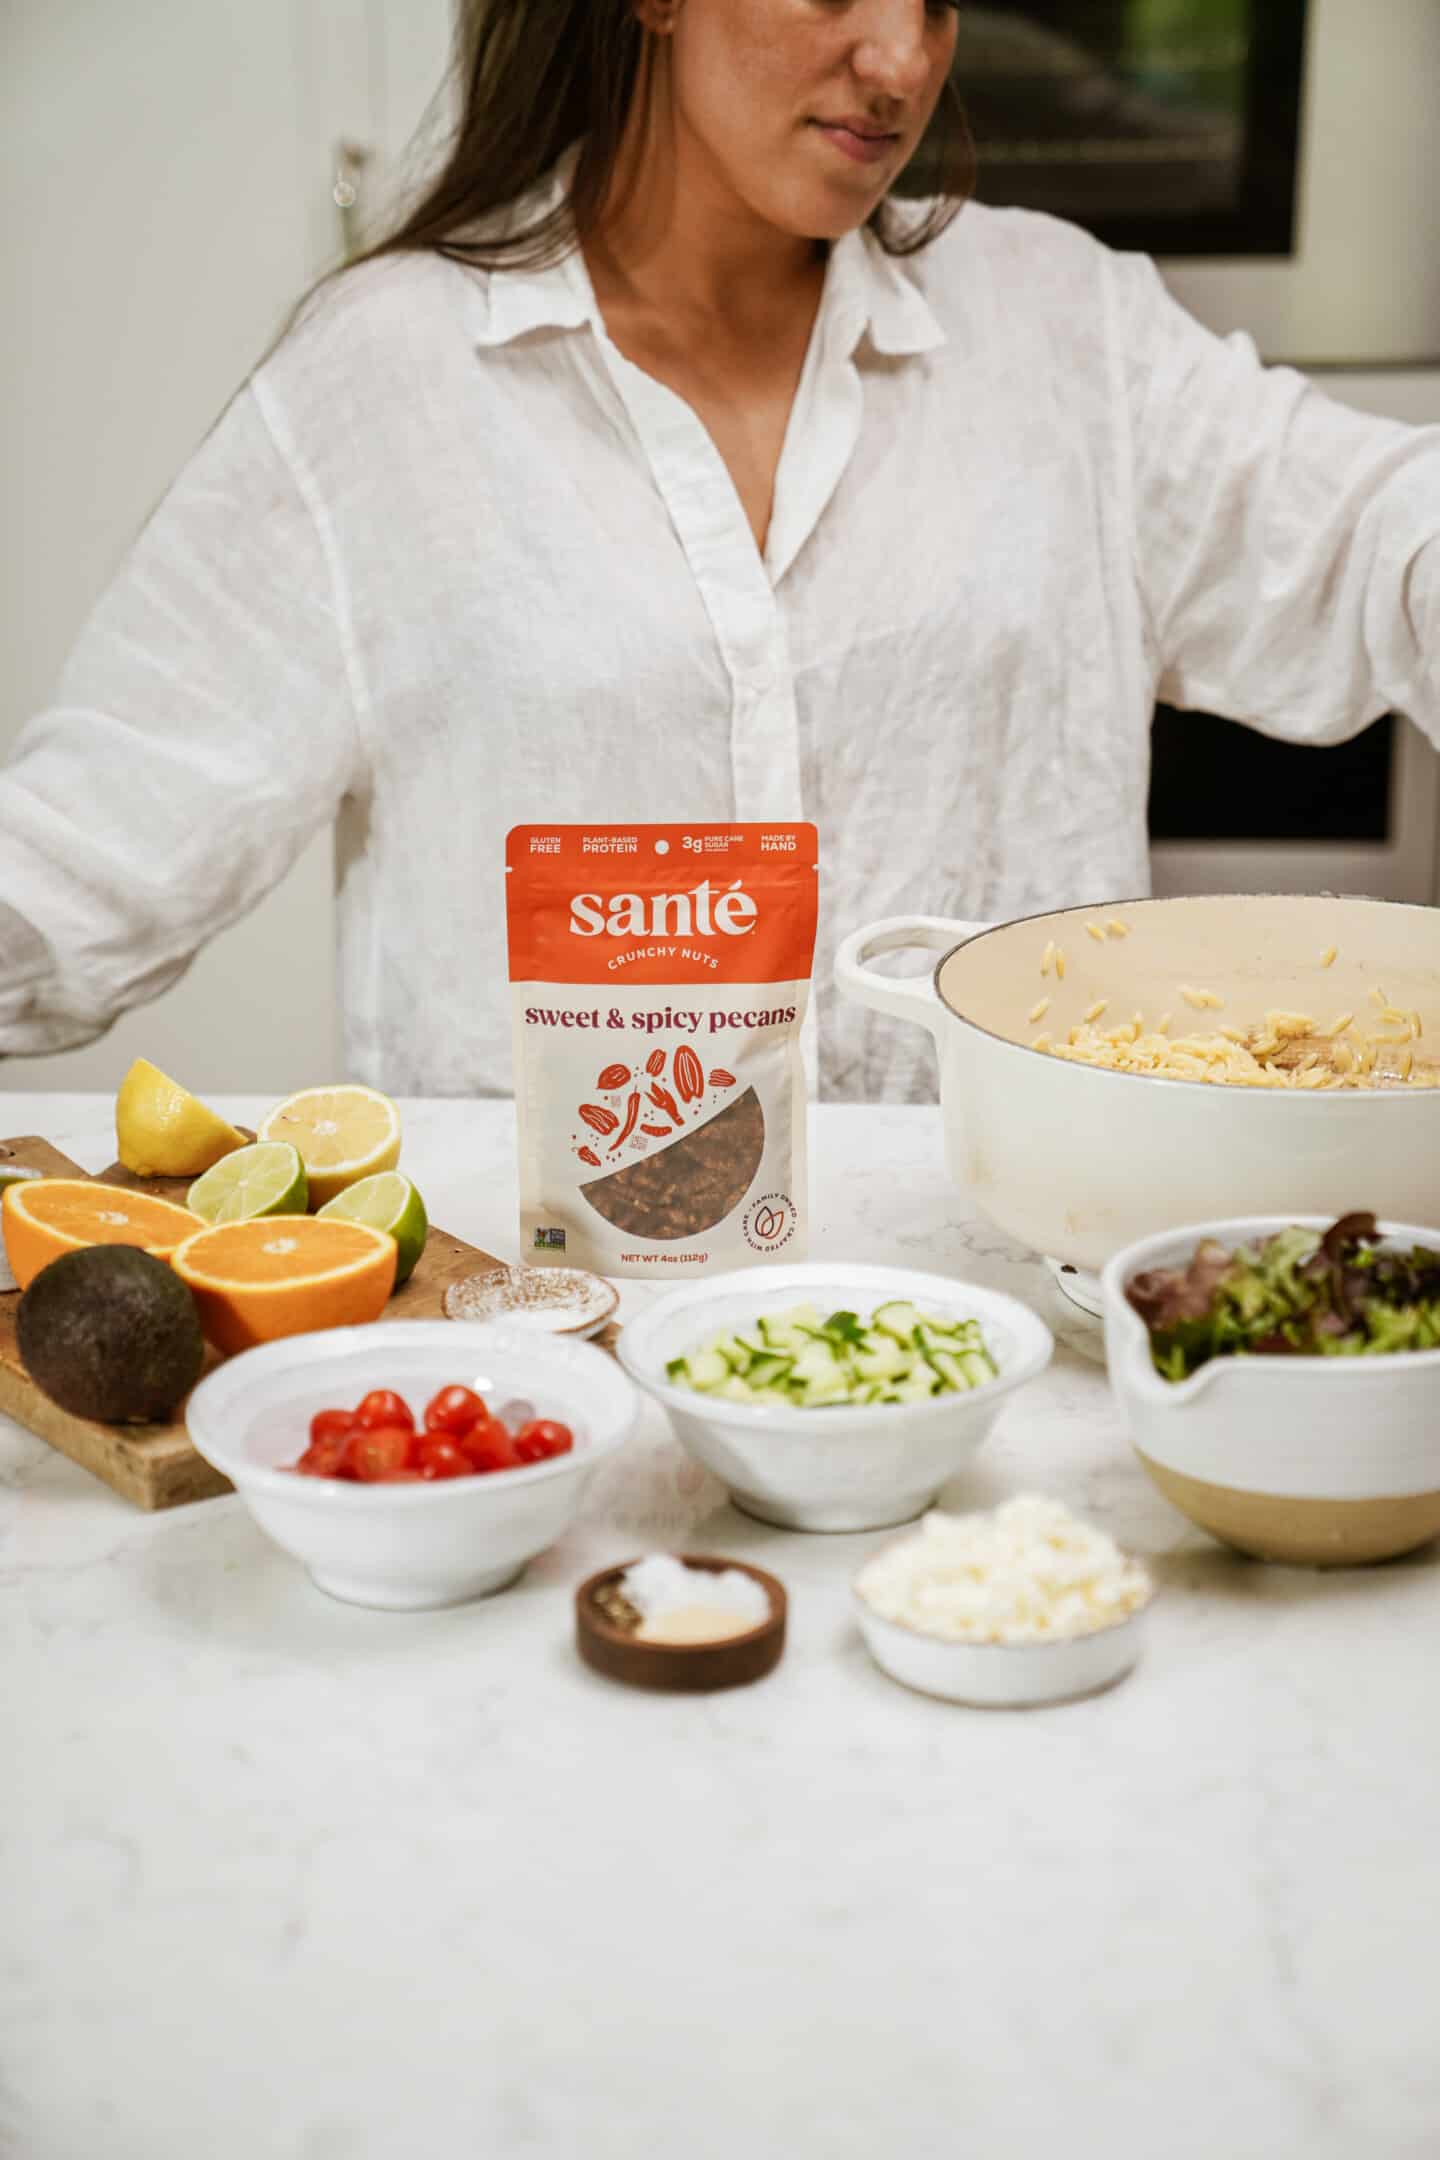 Ingredients on table for summer salad with Sante nuts